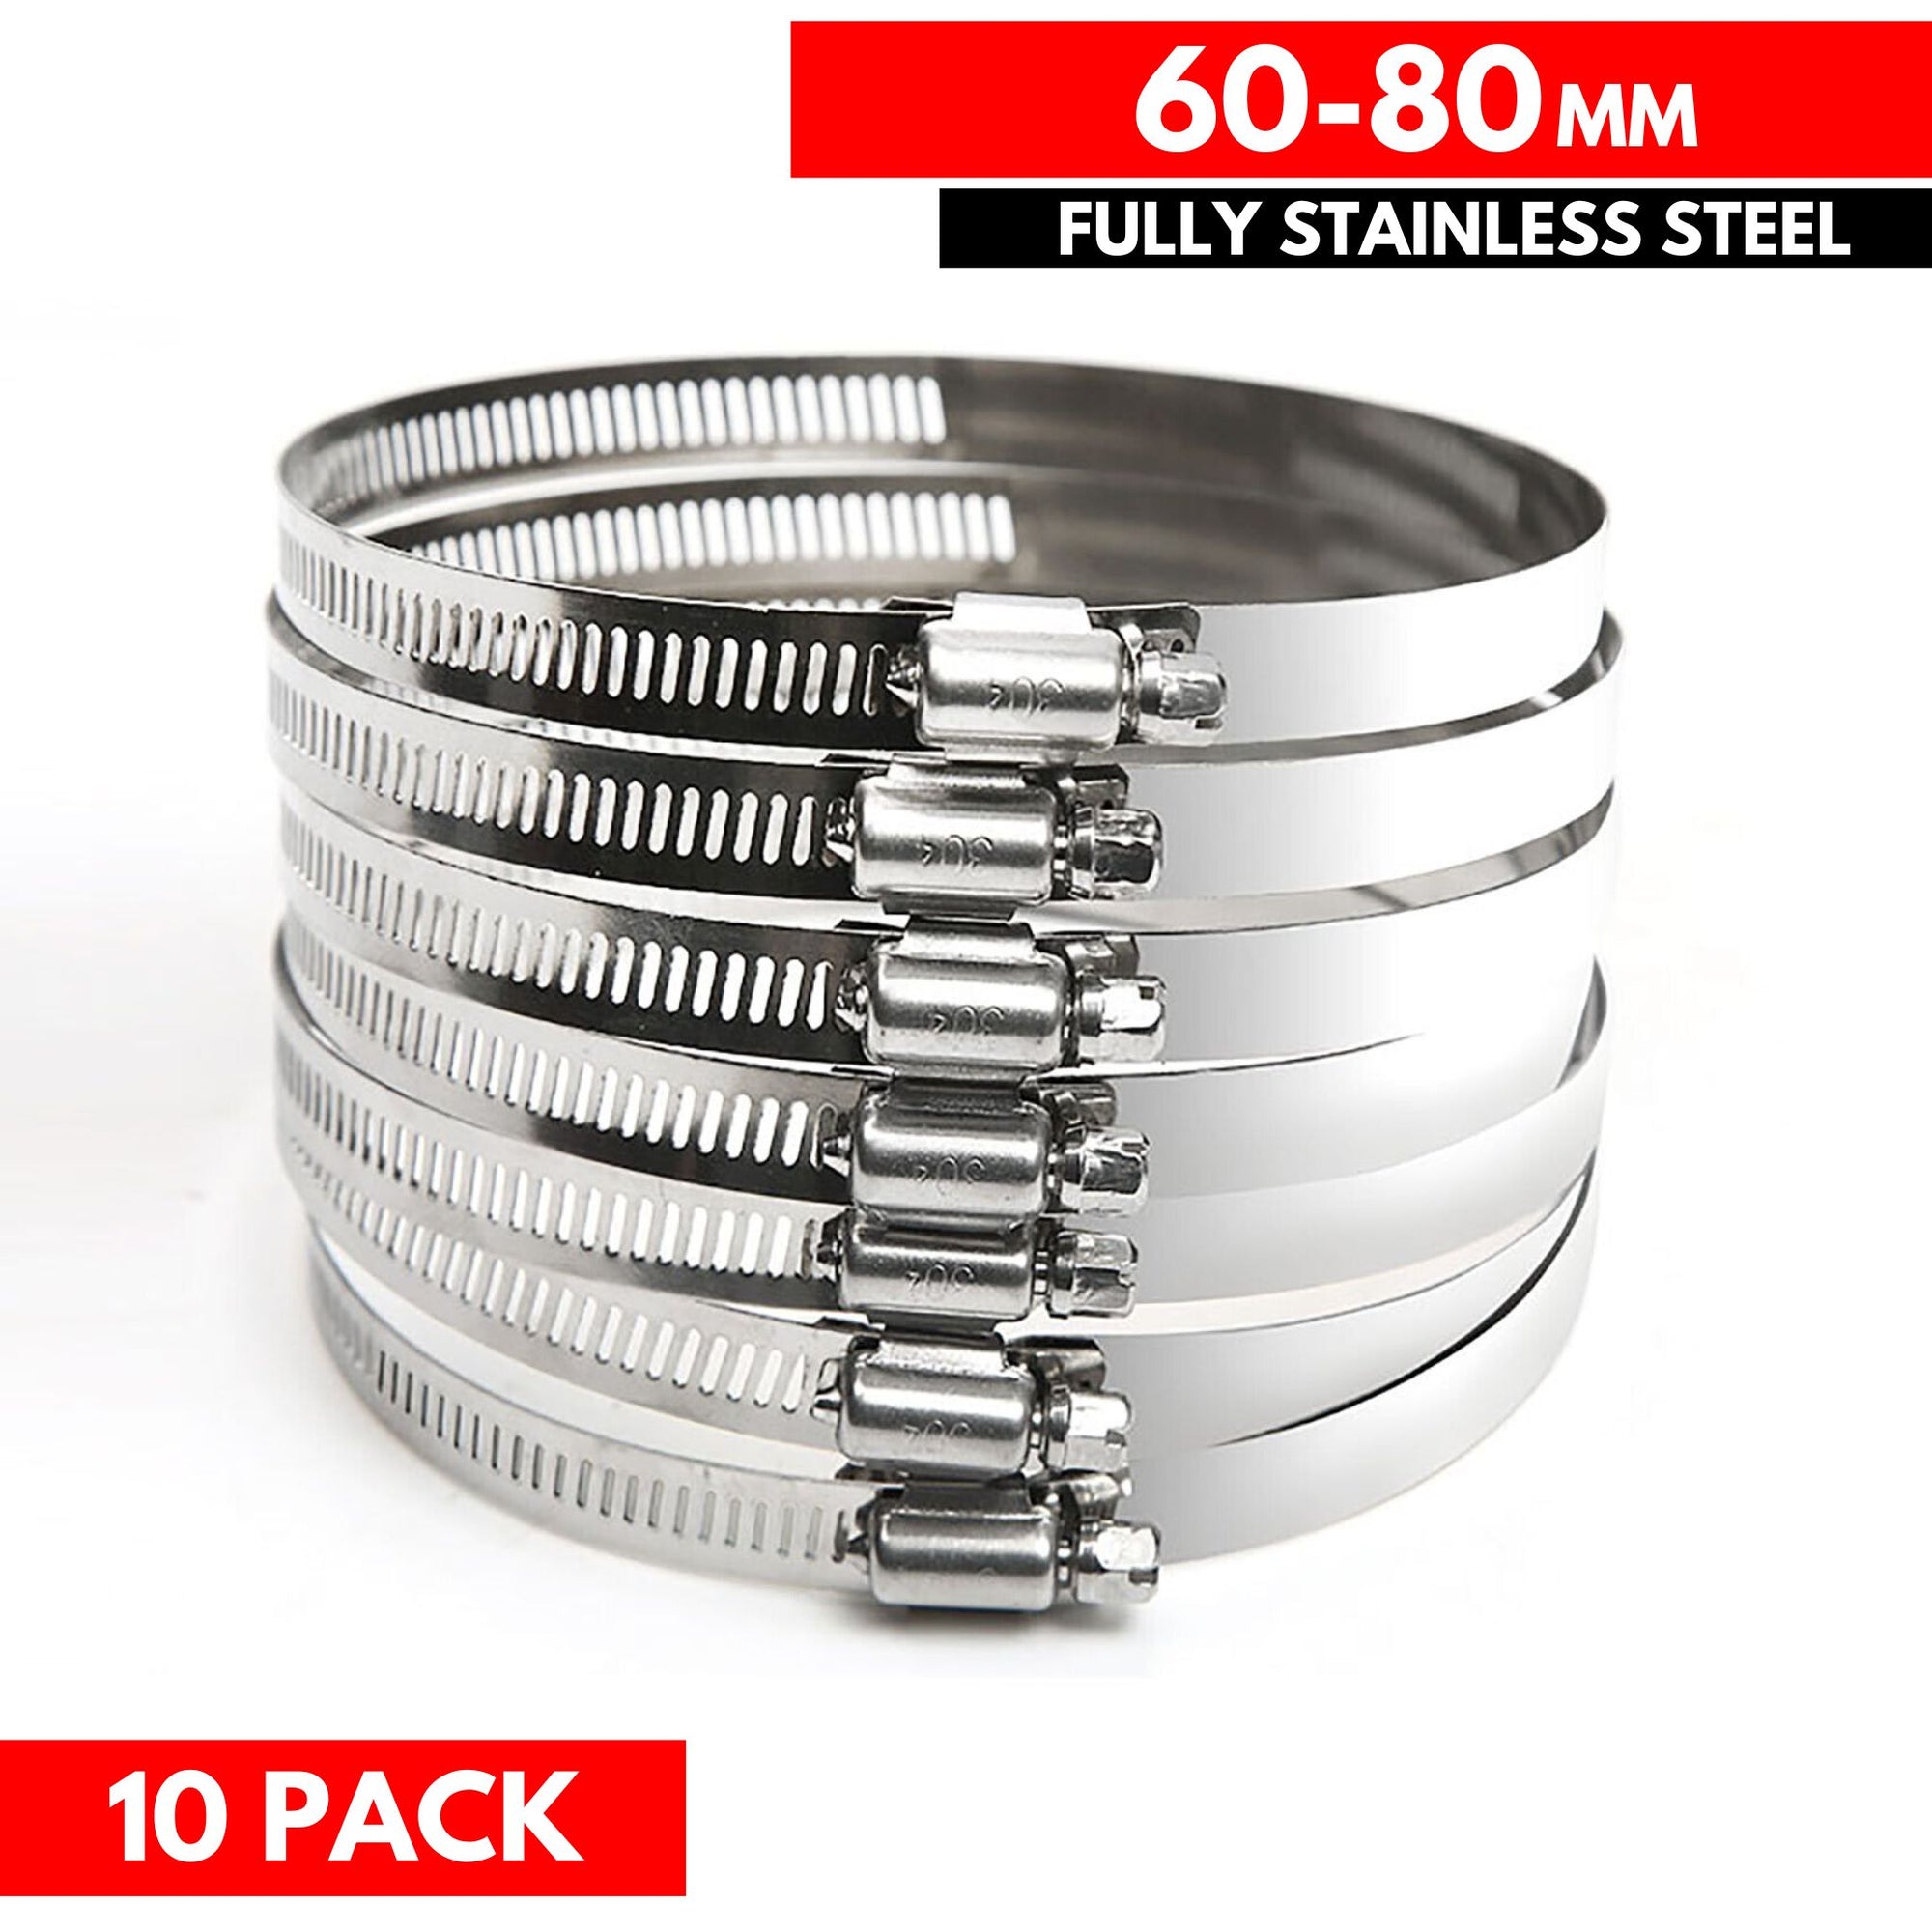 60-80mm - German Type 304 Hose Clamp - Fully Stainless Steel (10 Pieces) - South East Clearance Centre